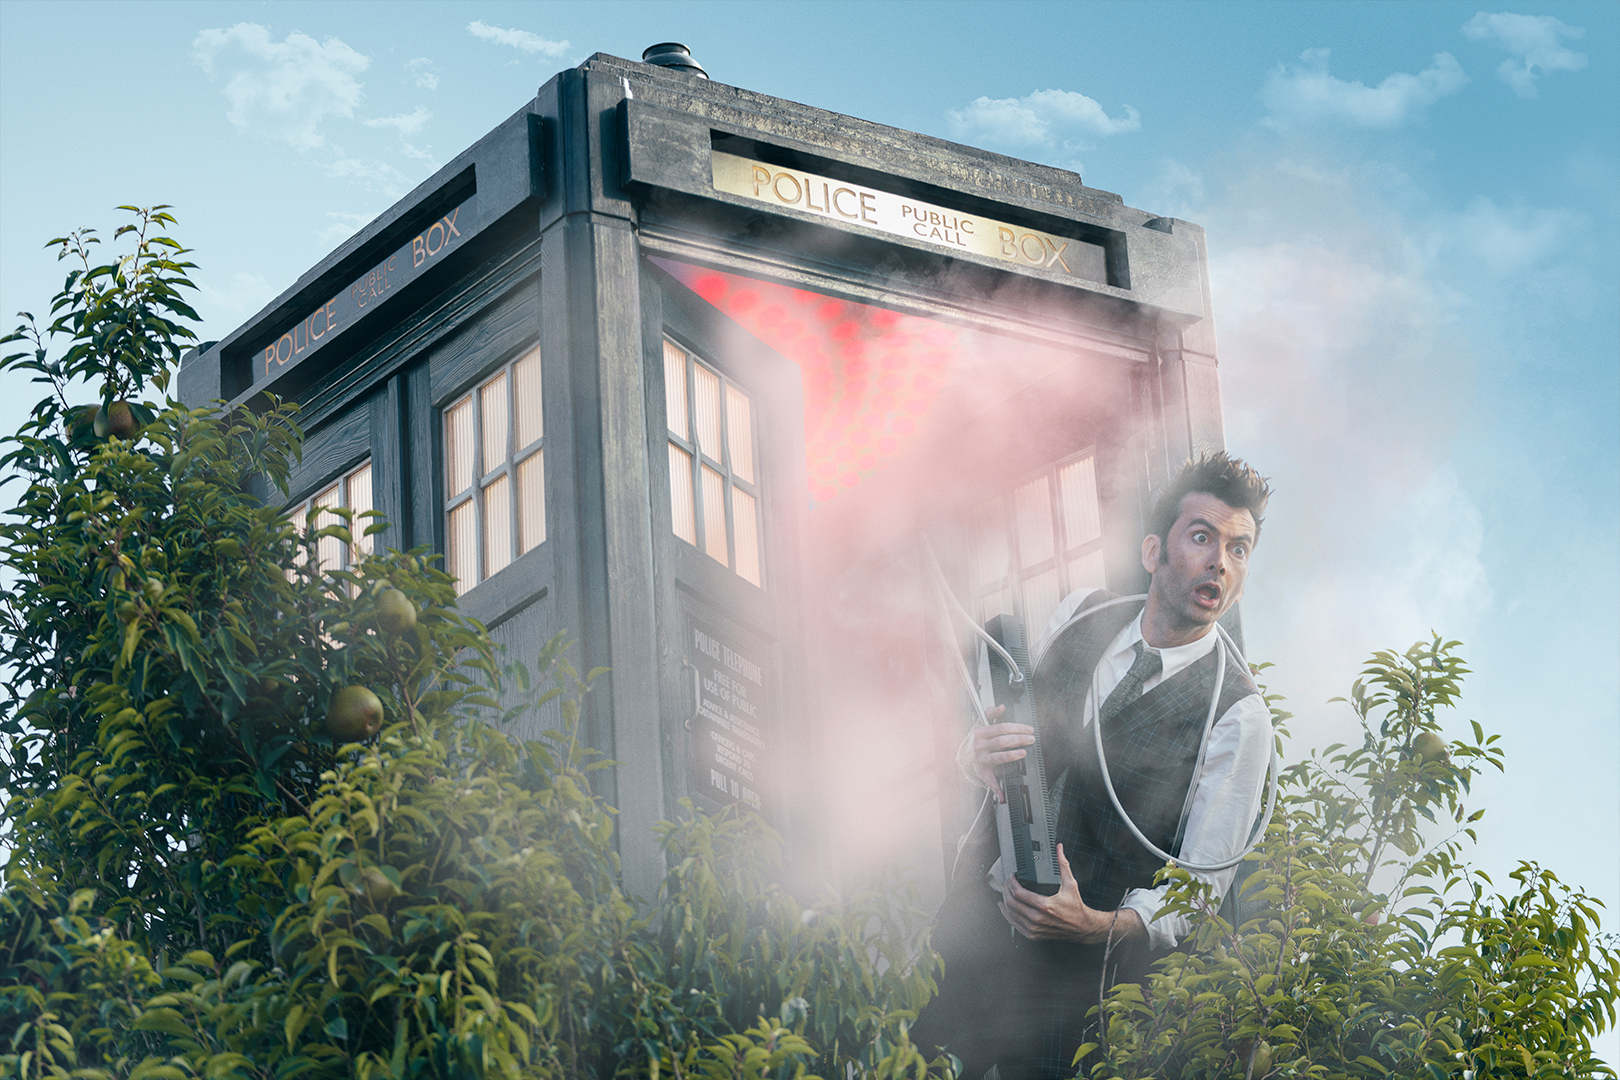 The Fourteenth Doctor exits the TARDIS.